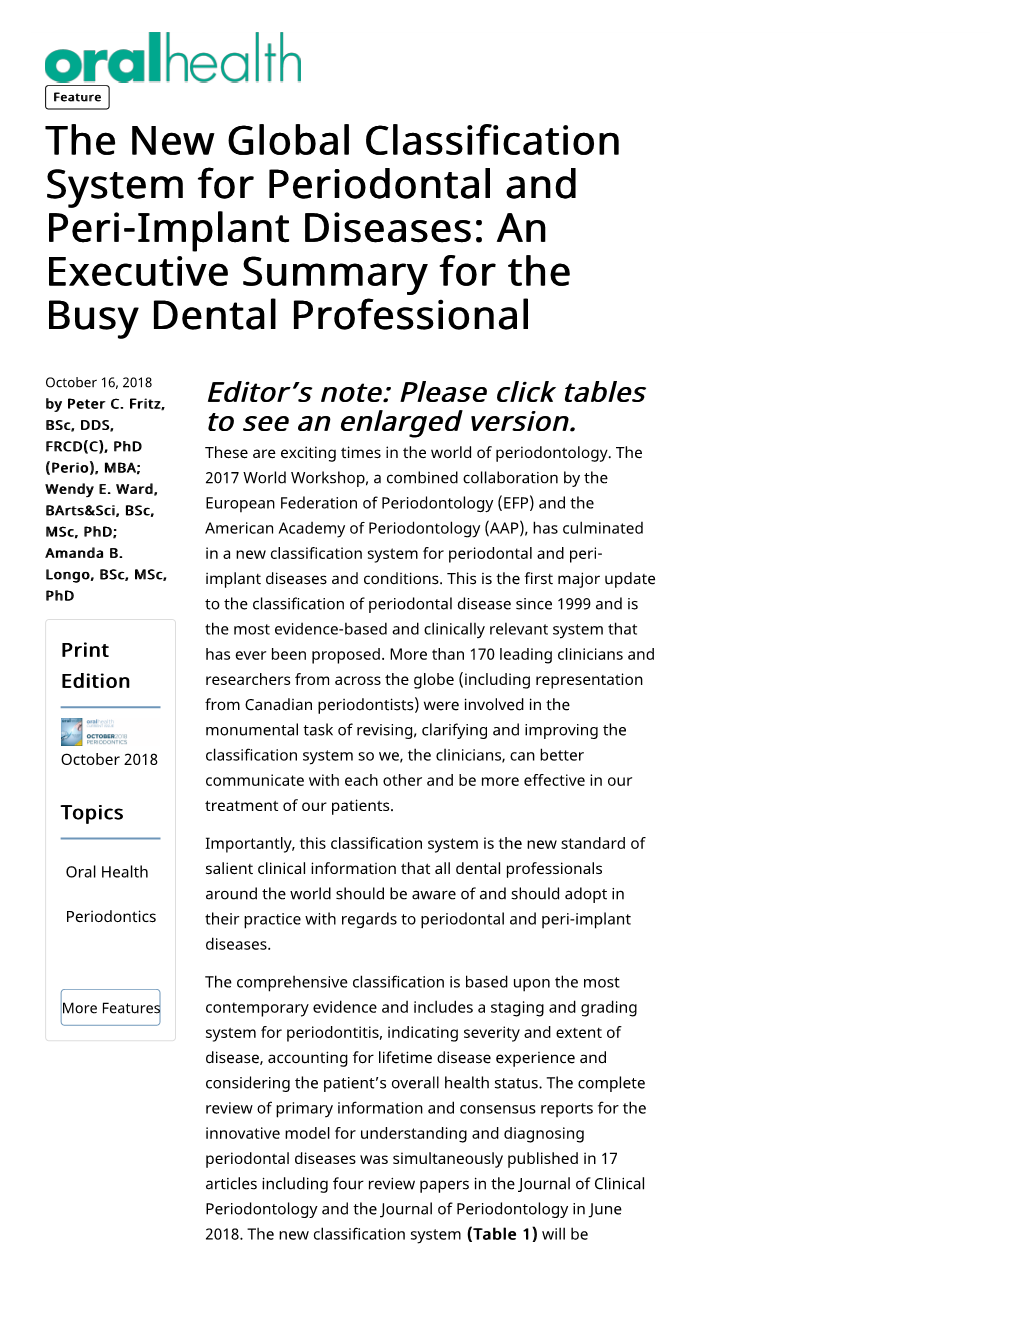 The New Global Classification System for Periodontal and Peri-Implant Diseases: an Executive Summary for the Busy Dental Professional